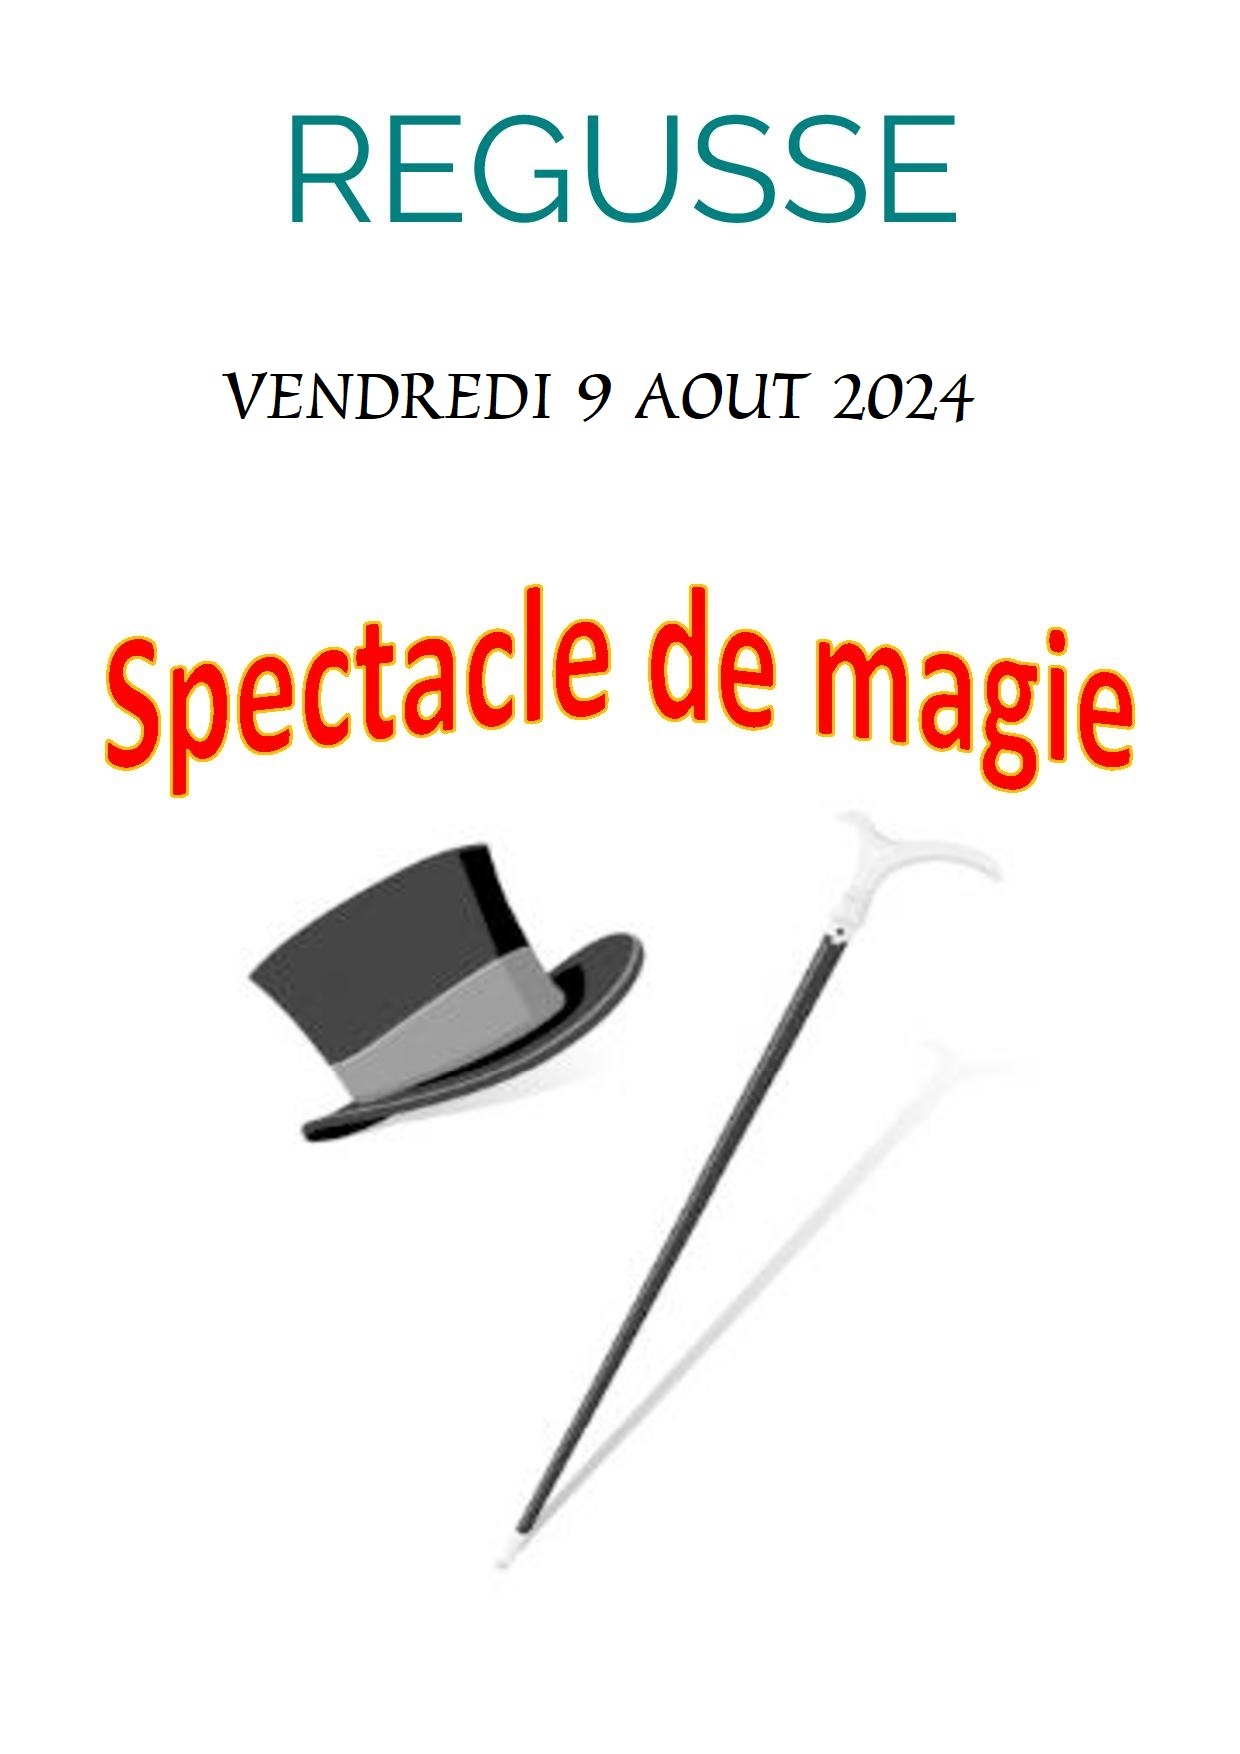 Magie spectacle - Magie spectacle